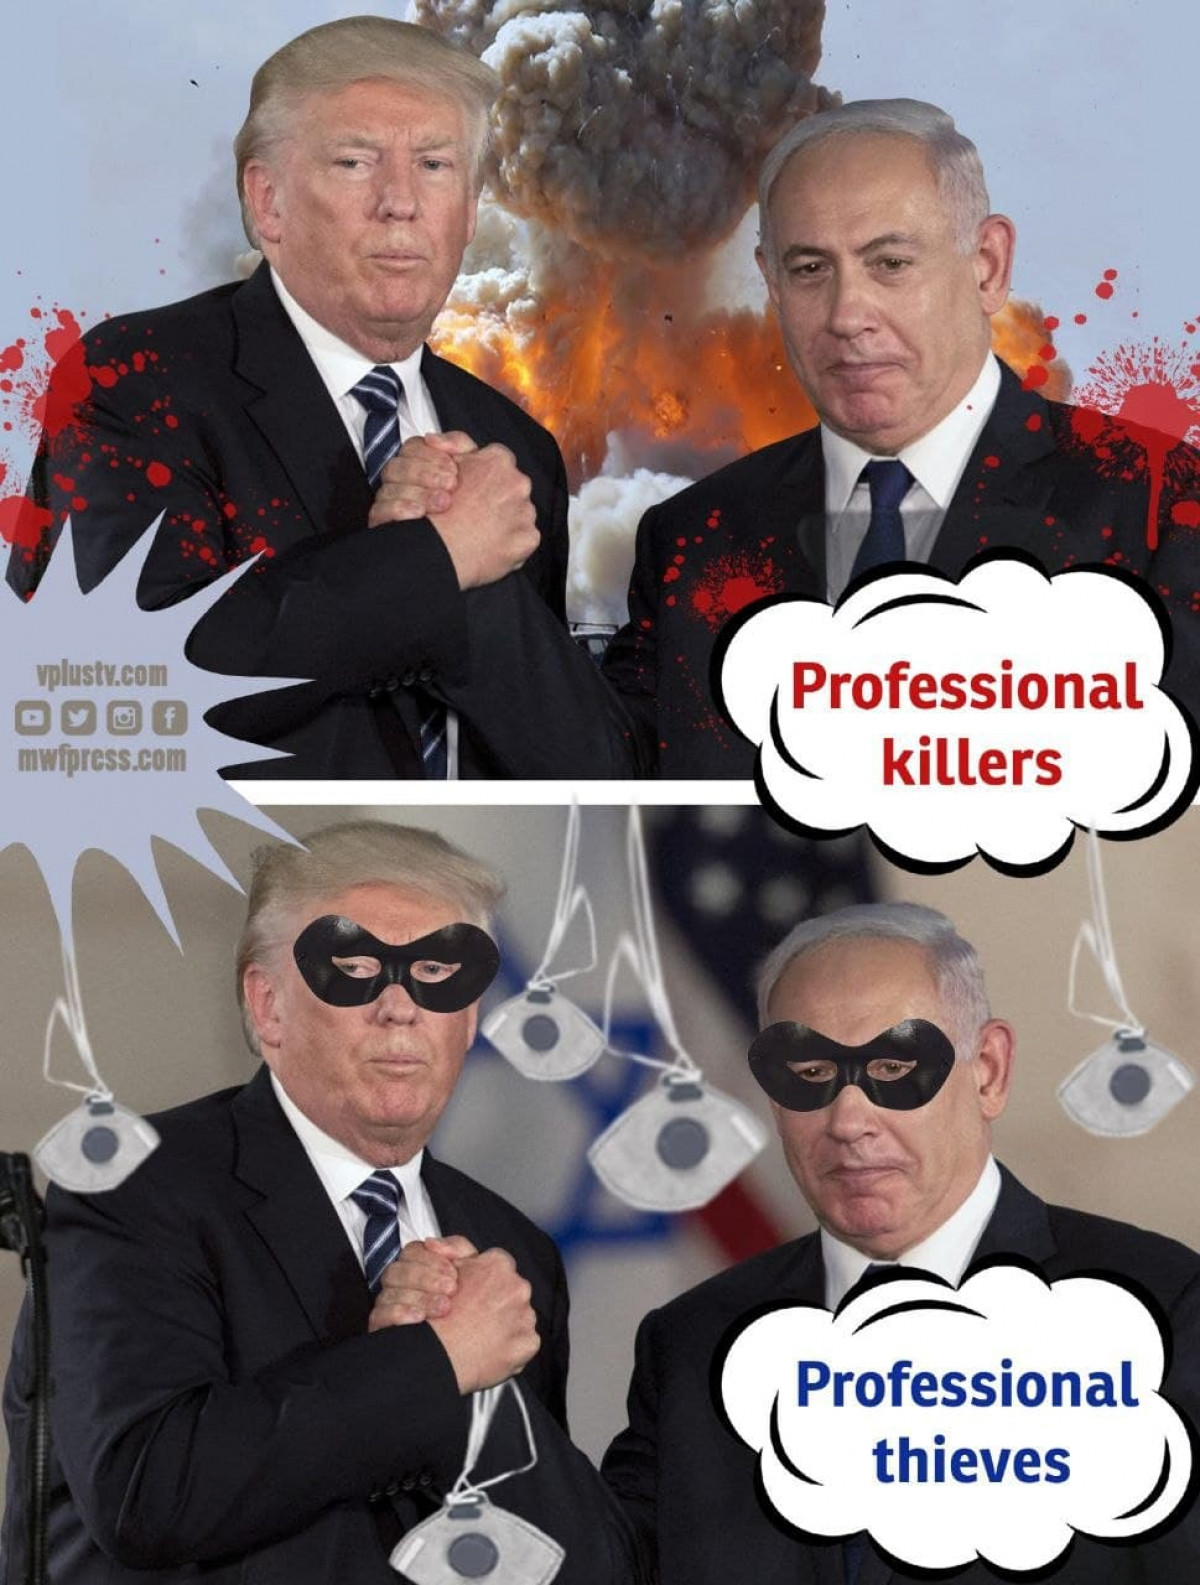 Professional killers Professional thieves